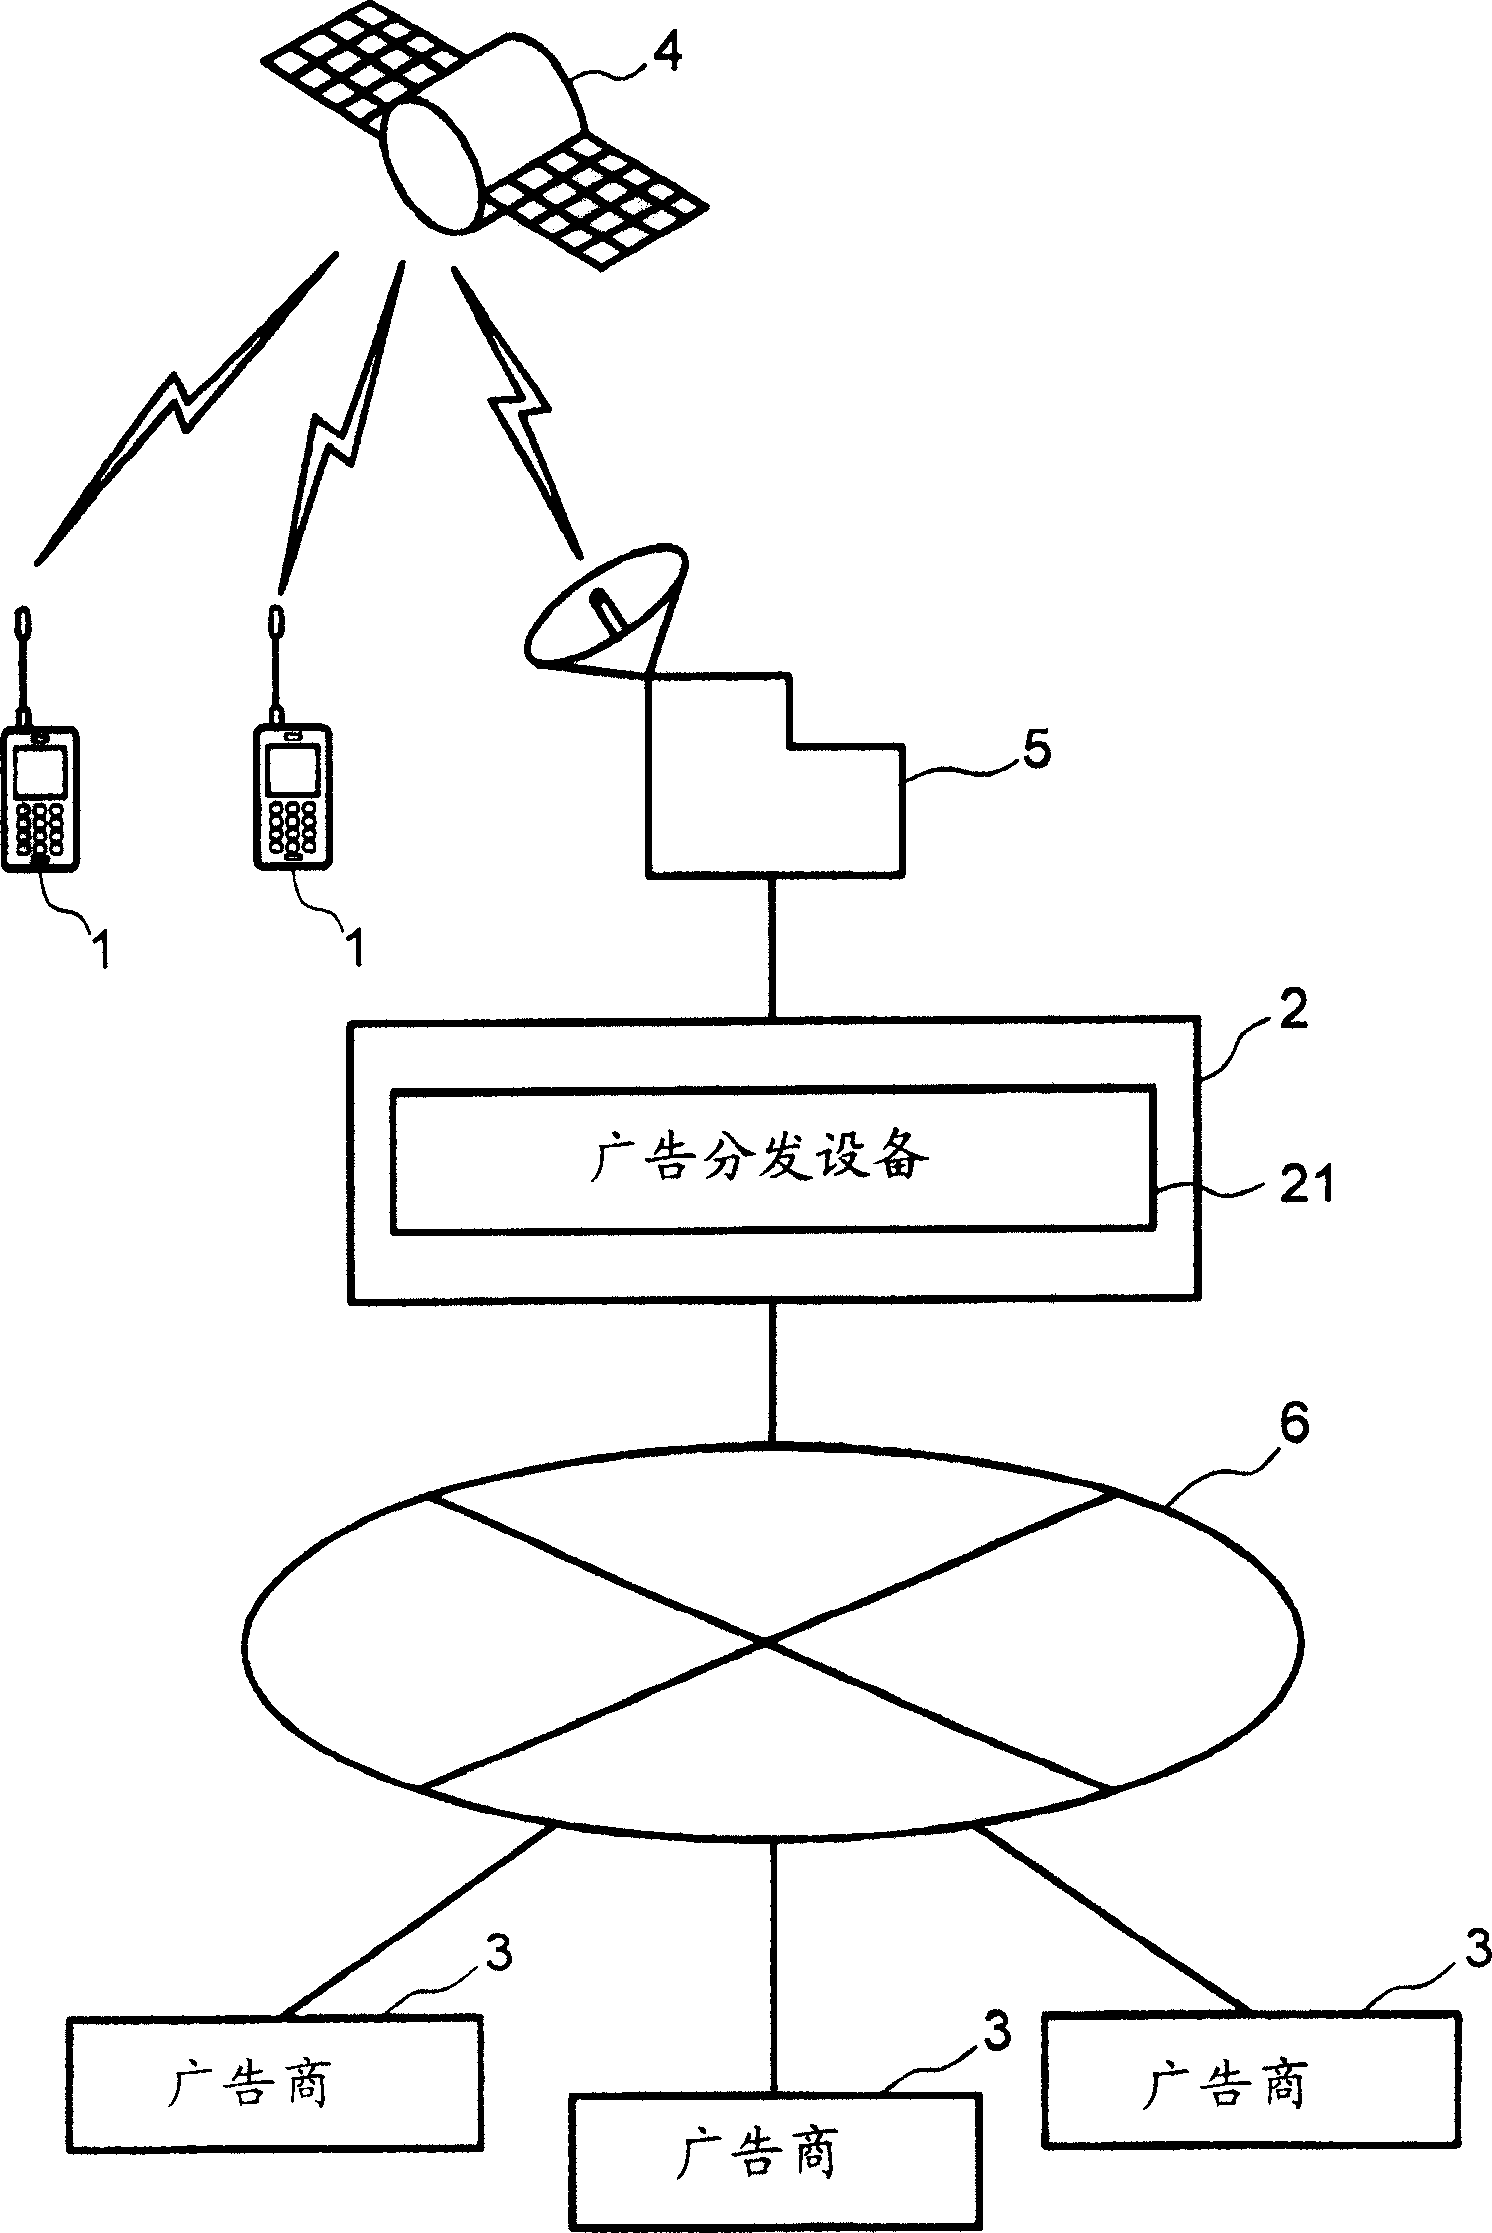 Device for distributing advertisement